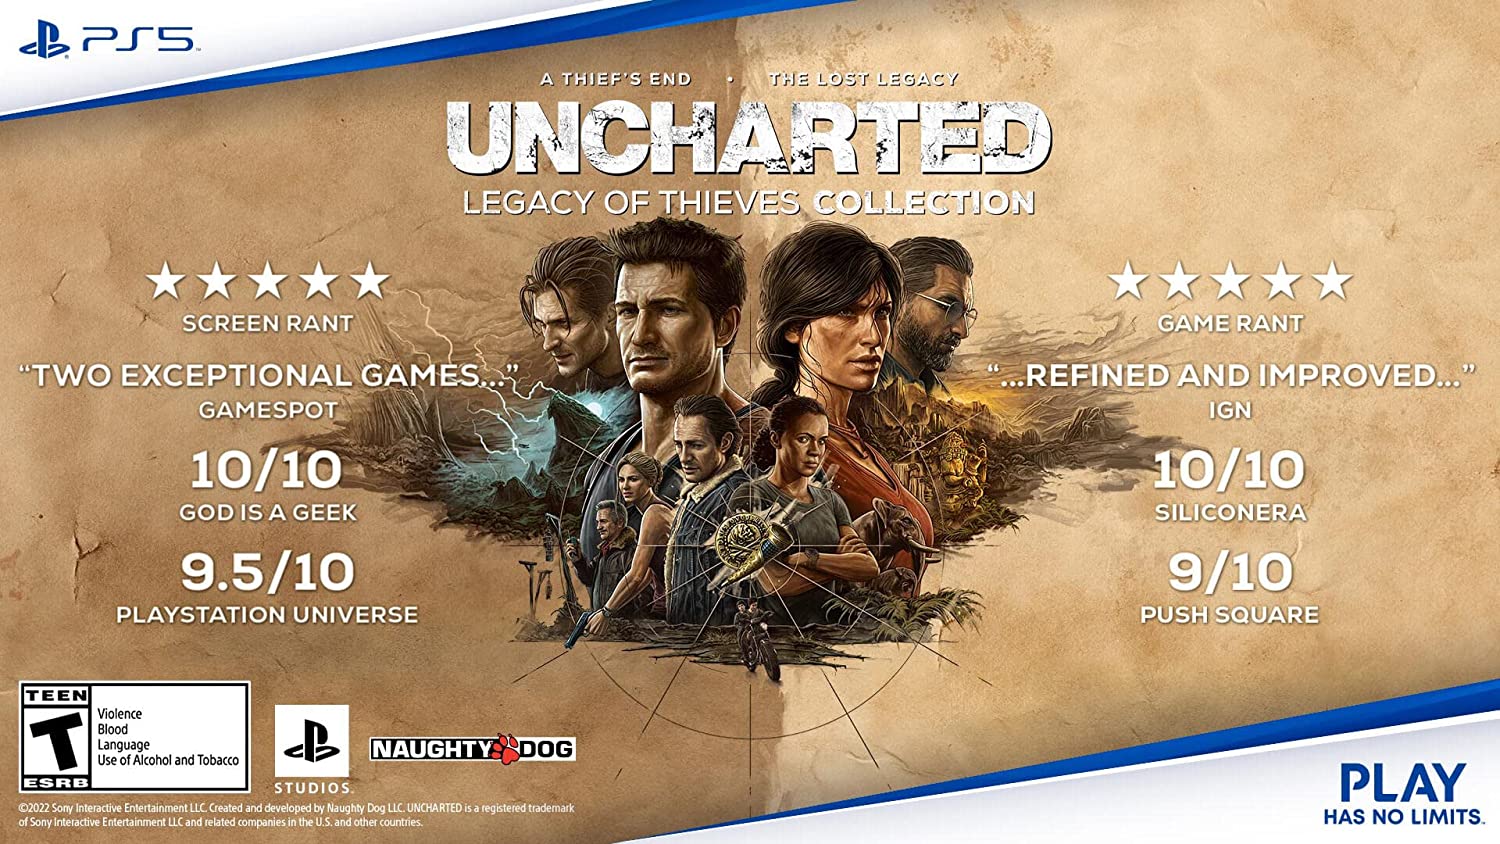 Uncharted legacy of thieves купить. Uncharted 4 ps5. Плейстейшен 5 анчартед Легаси. Uncharted collection ps5. Uncharted: Legacy of Thieves collection.